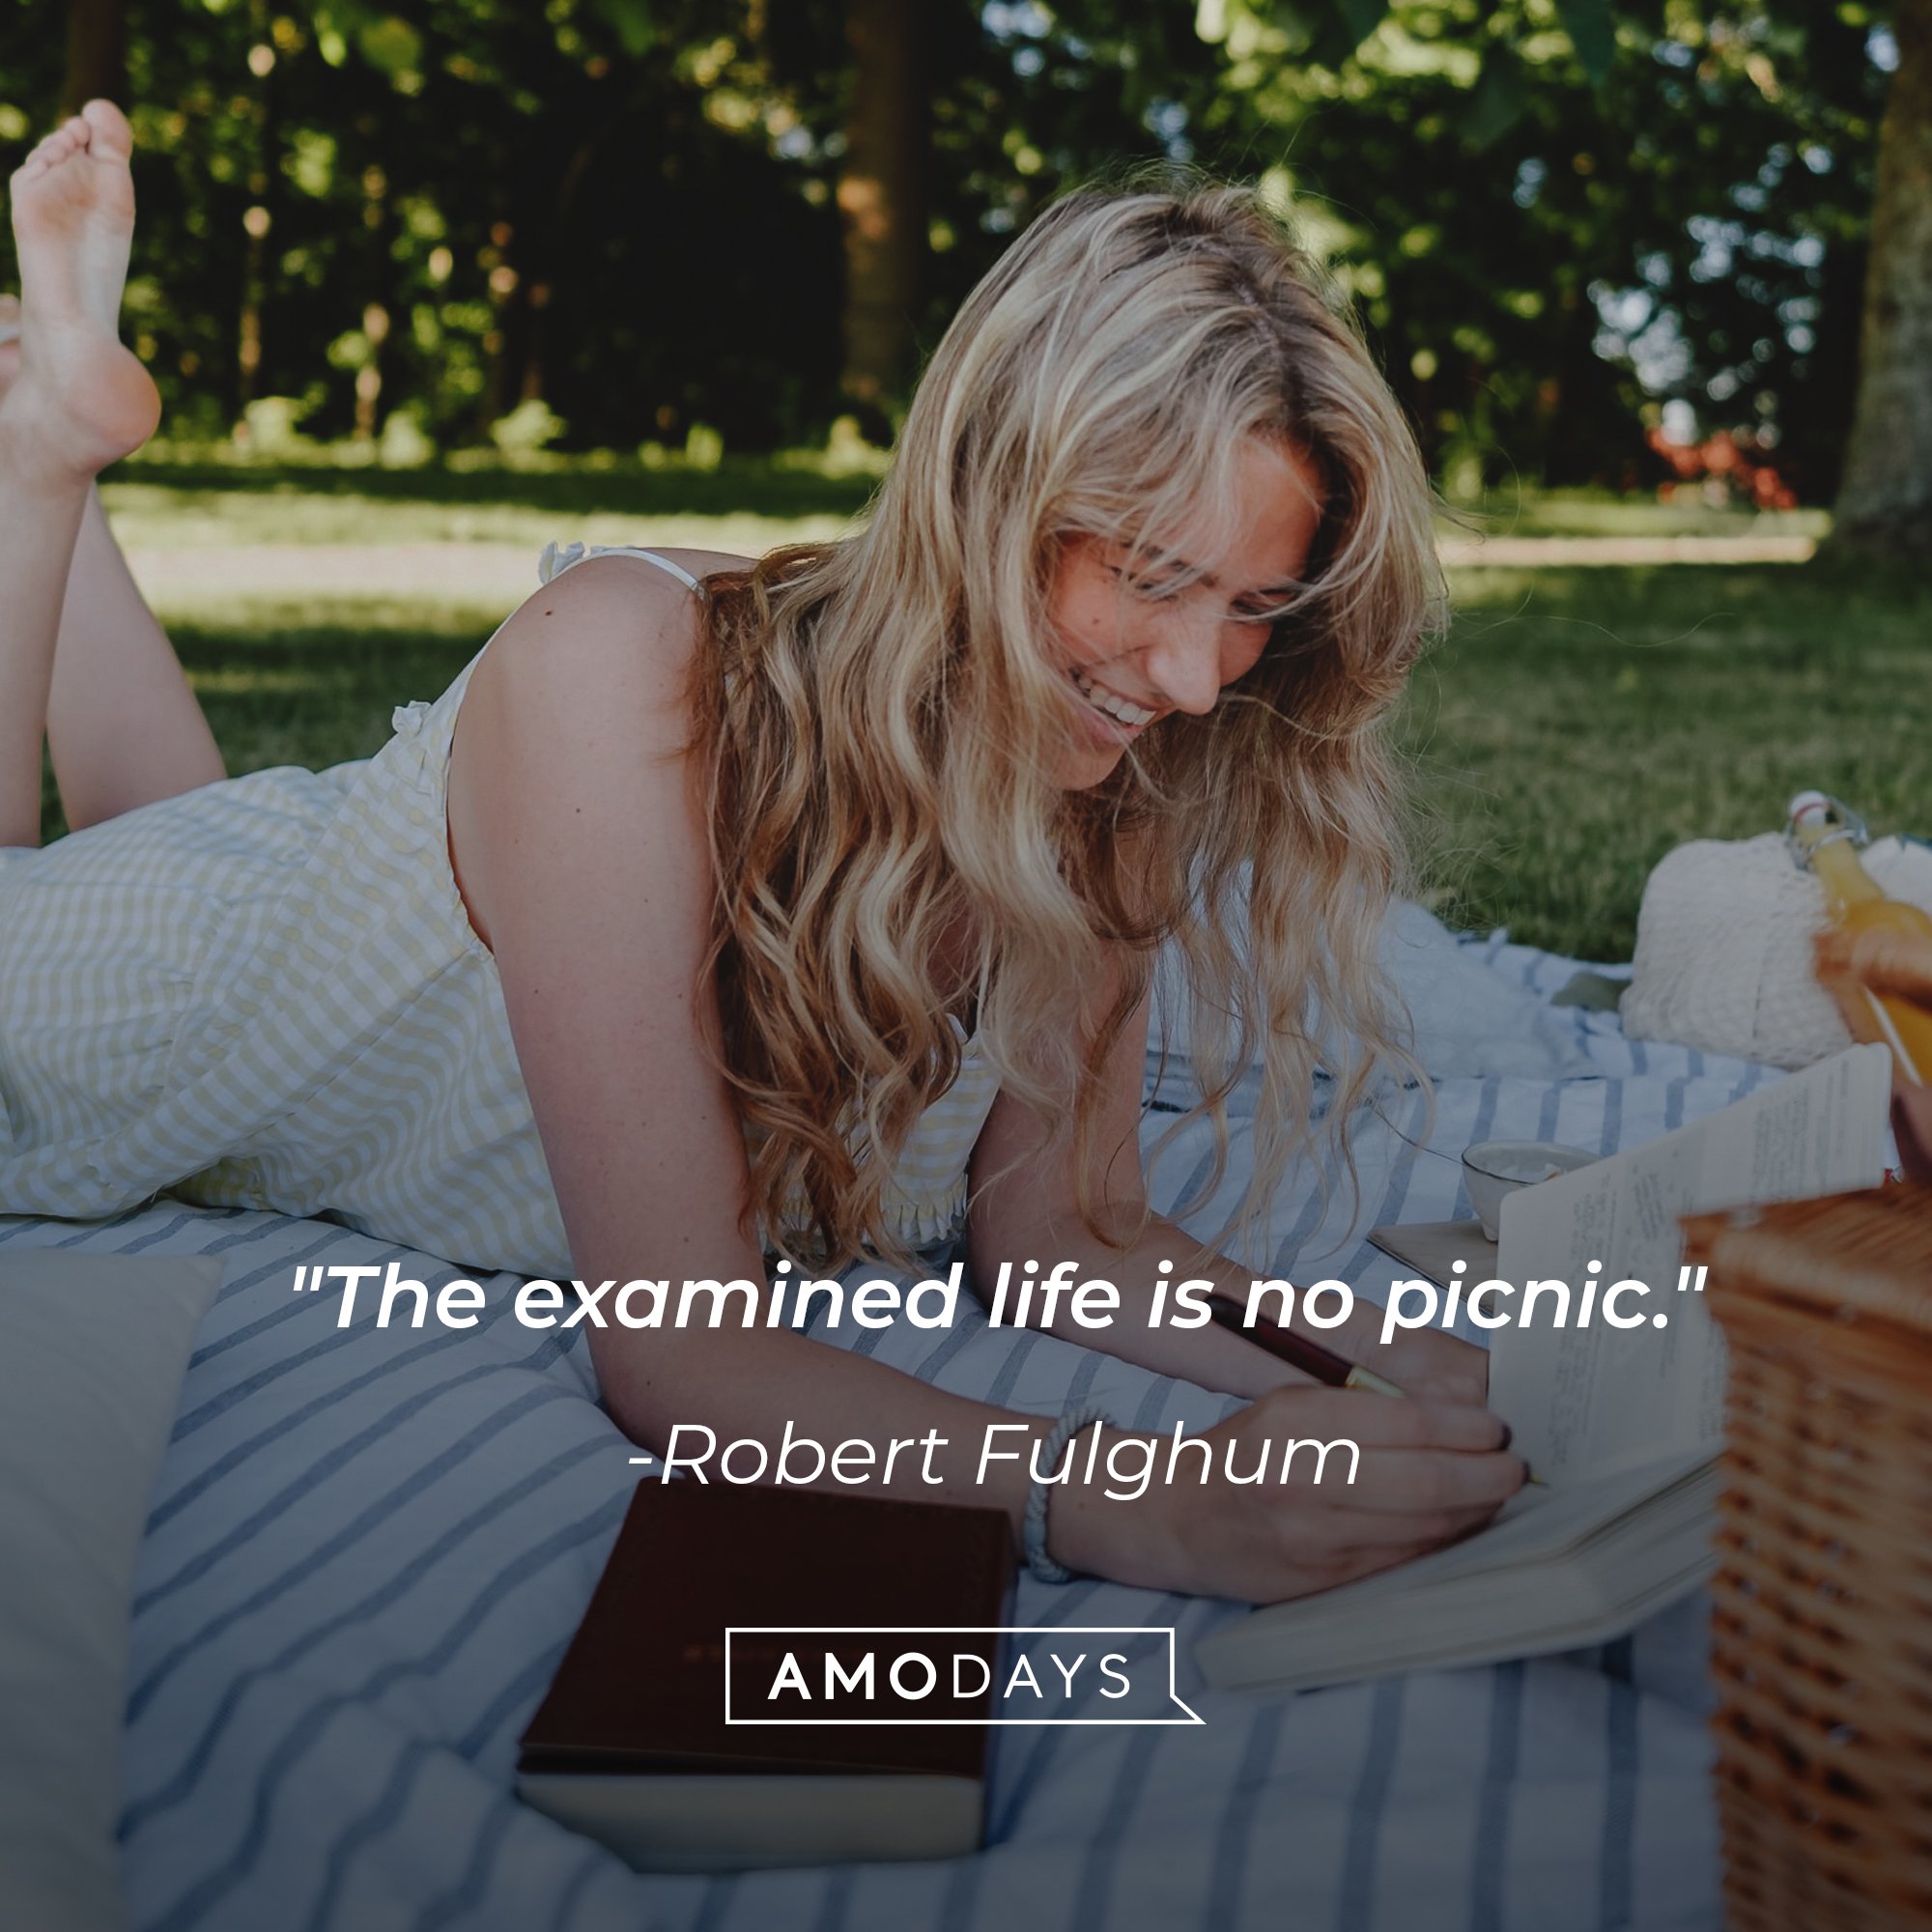 Robert Fulghum's quote: "The examined life is no picnic." | Image: AmoDays